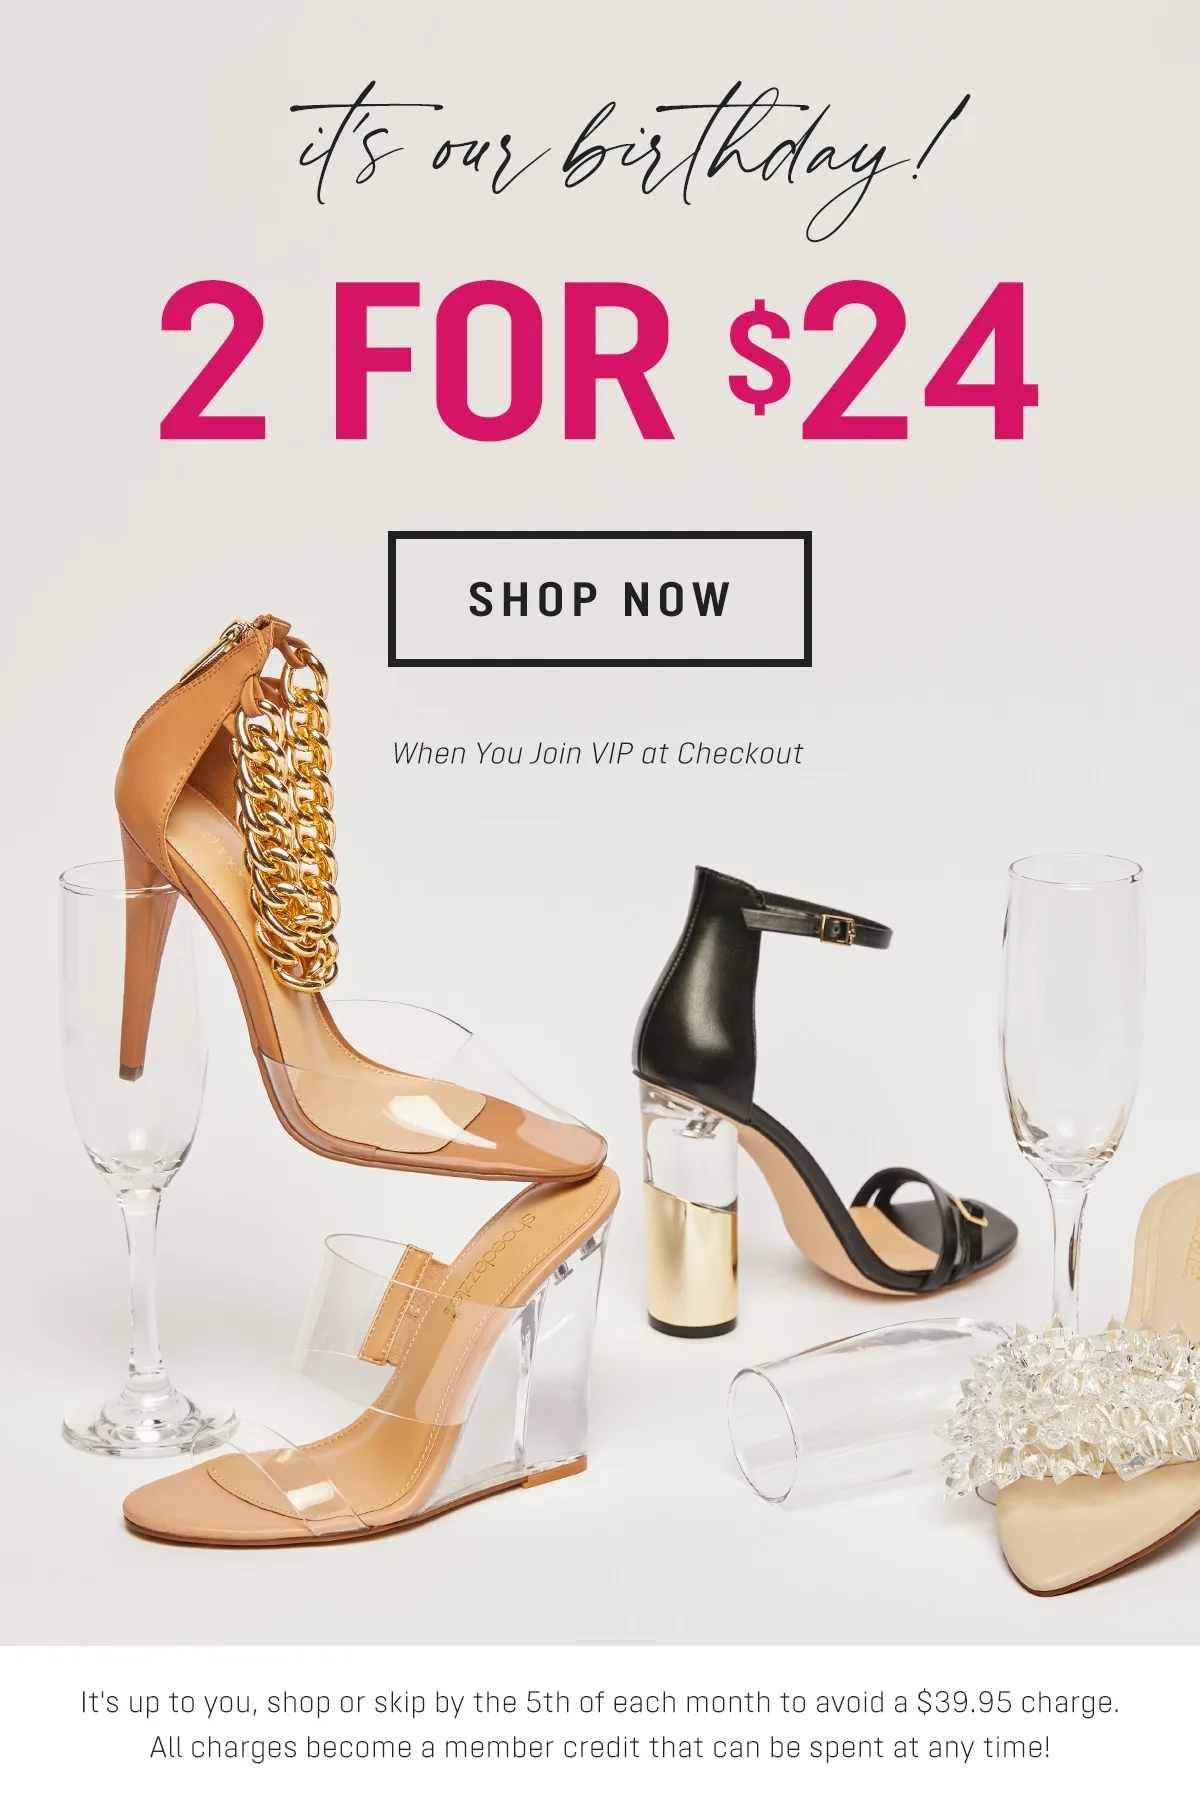 Something special from ShoeDazzle just 